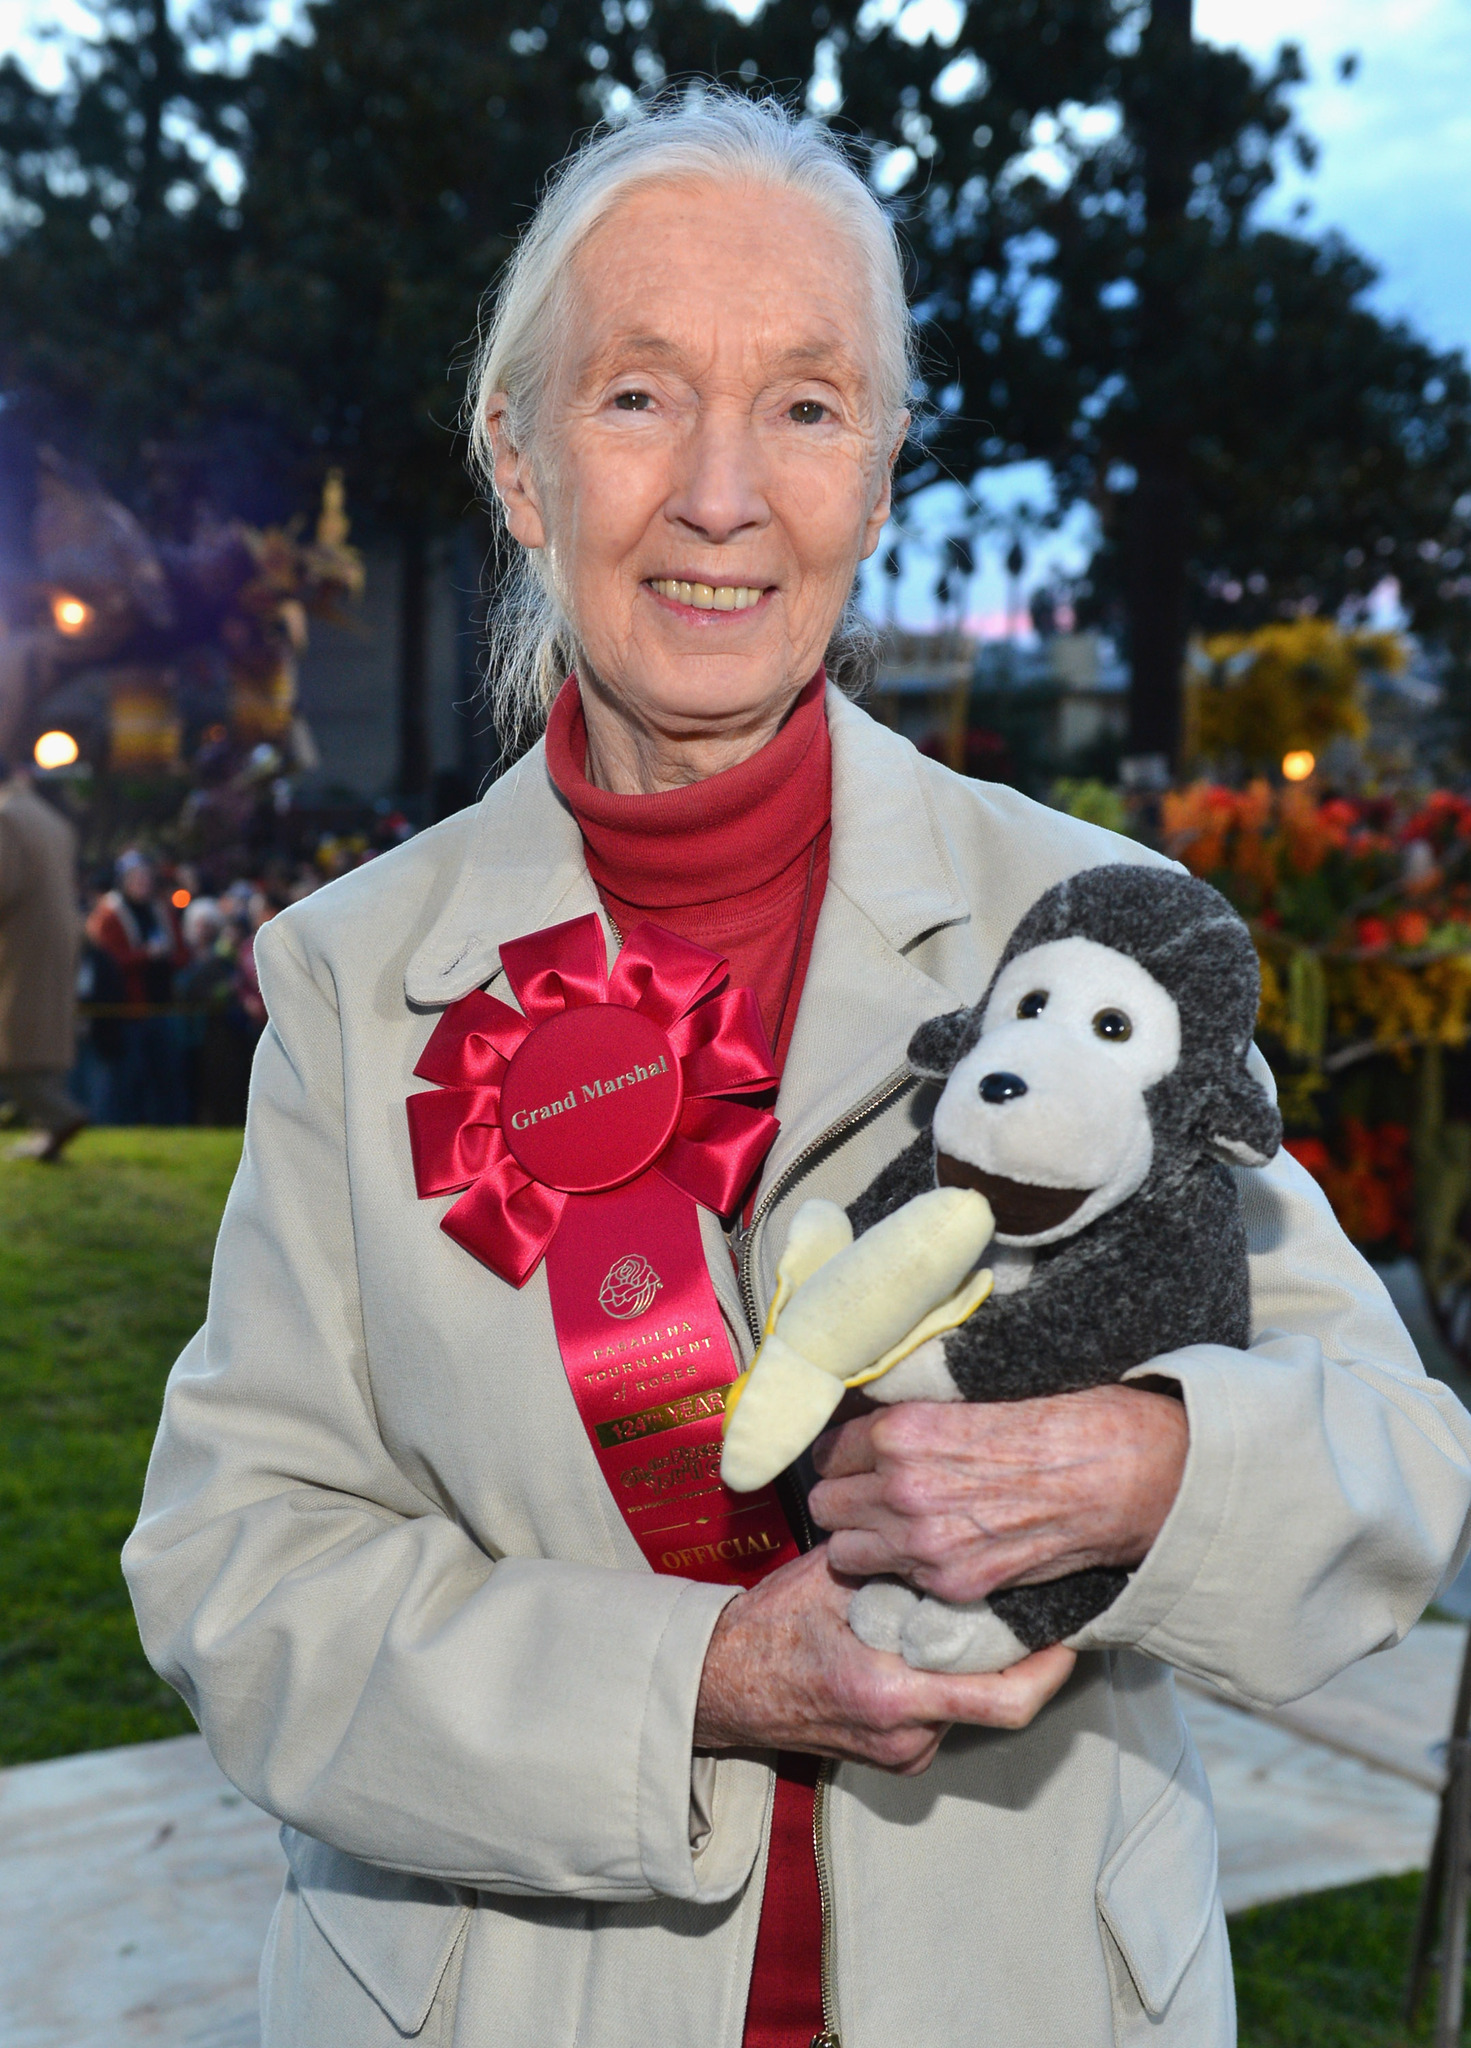 Dr. Jane Goodall participates in the 124th Tournament of Roses Parade.